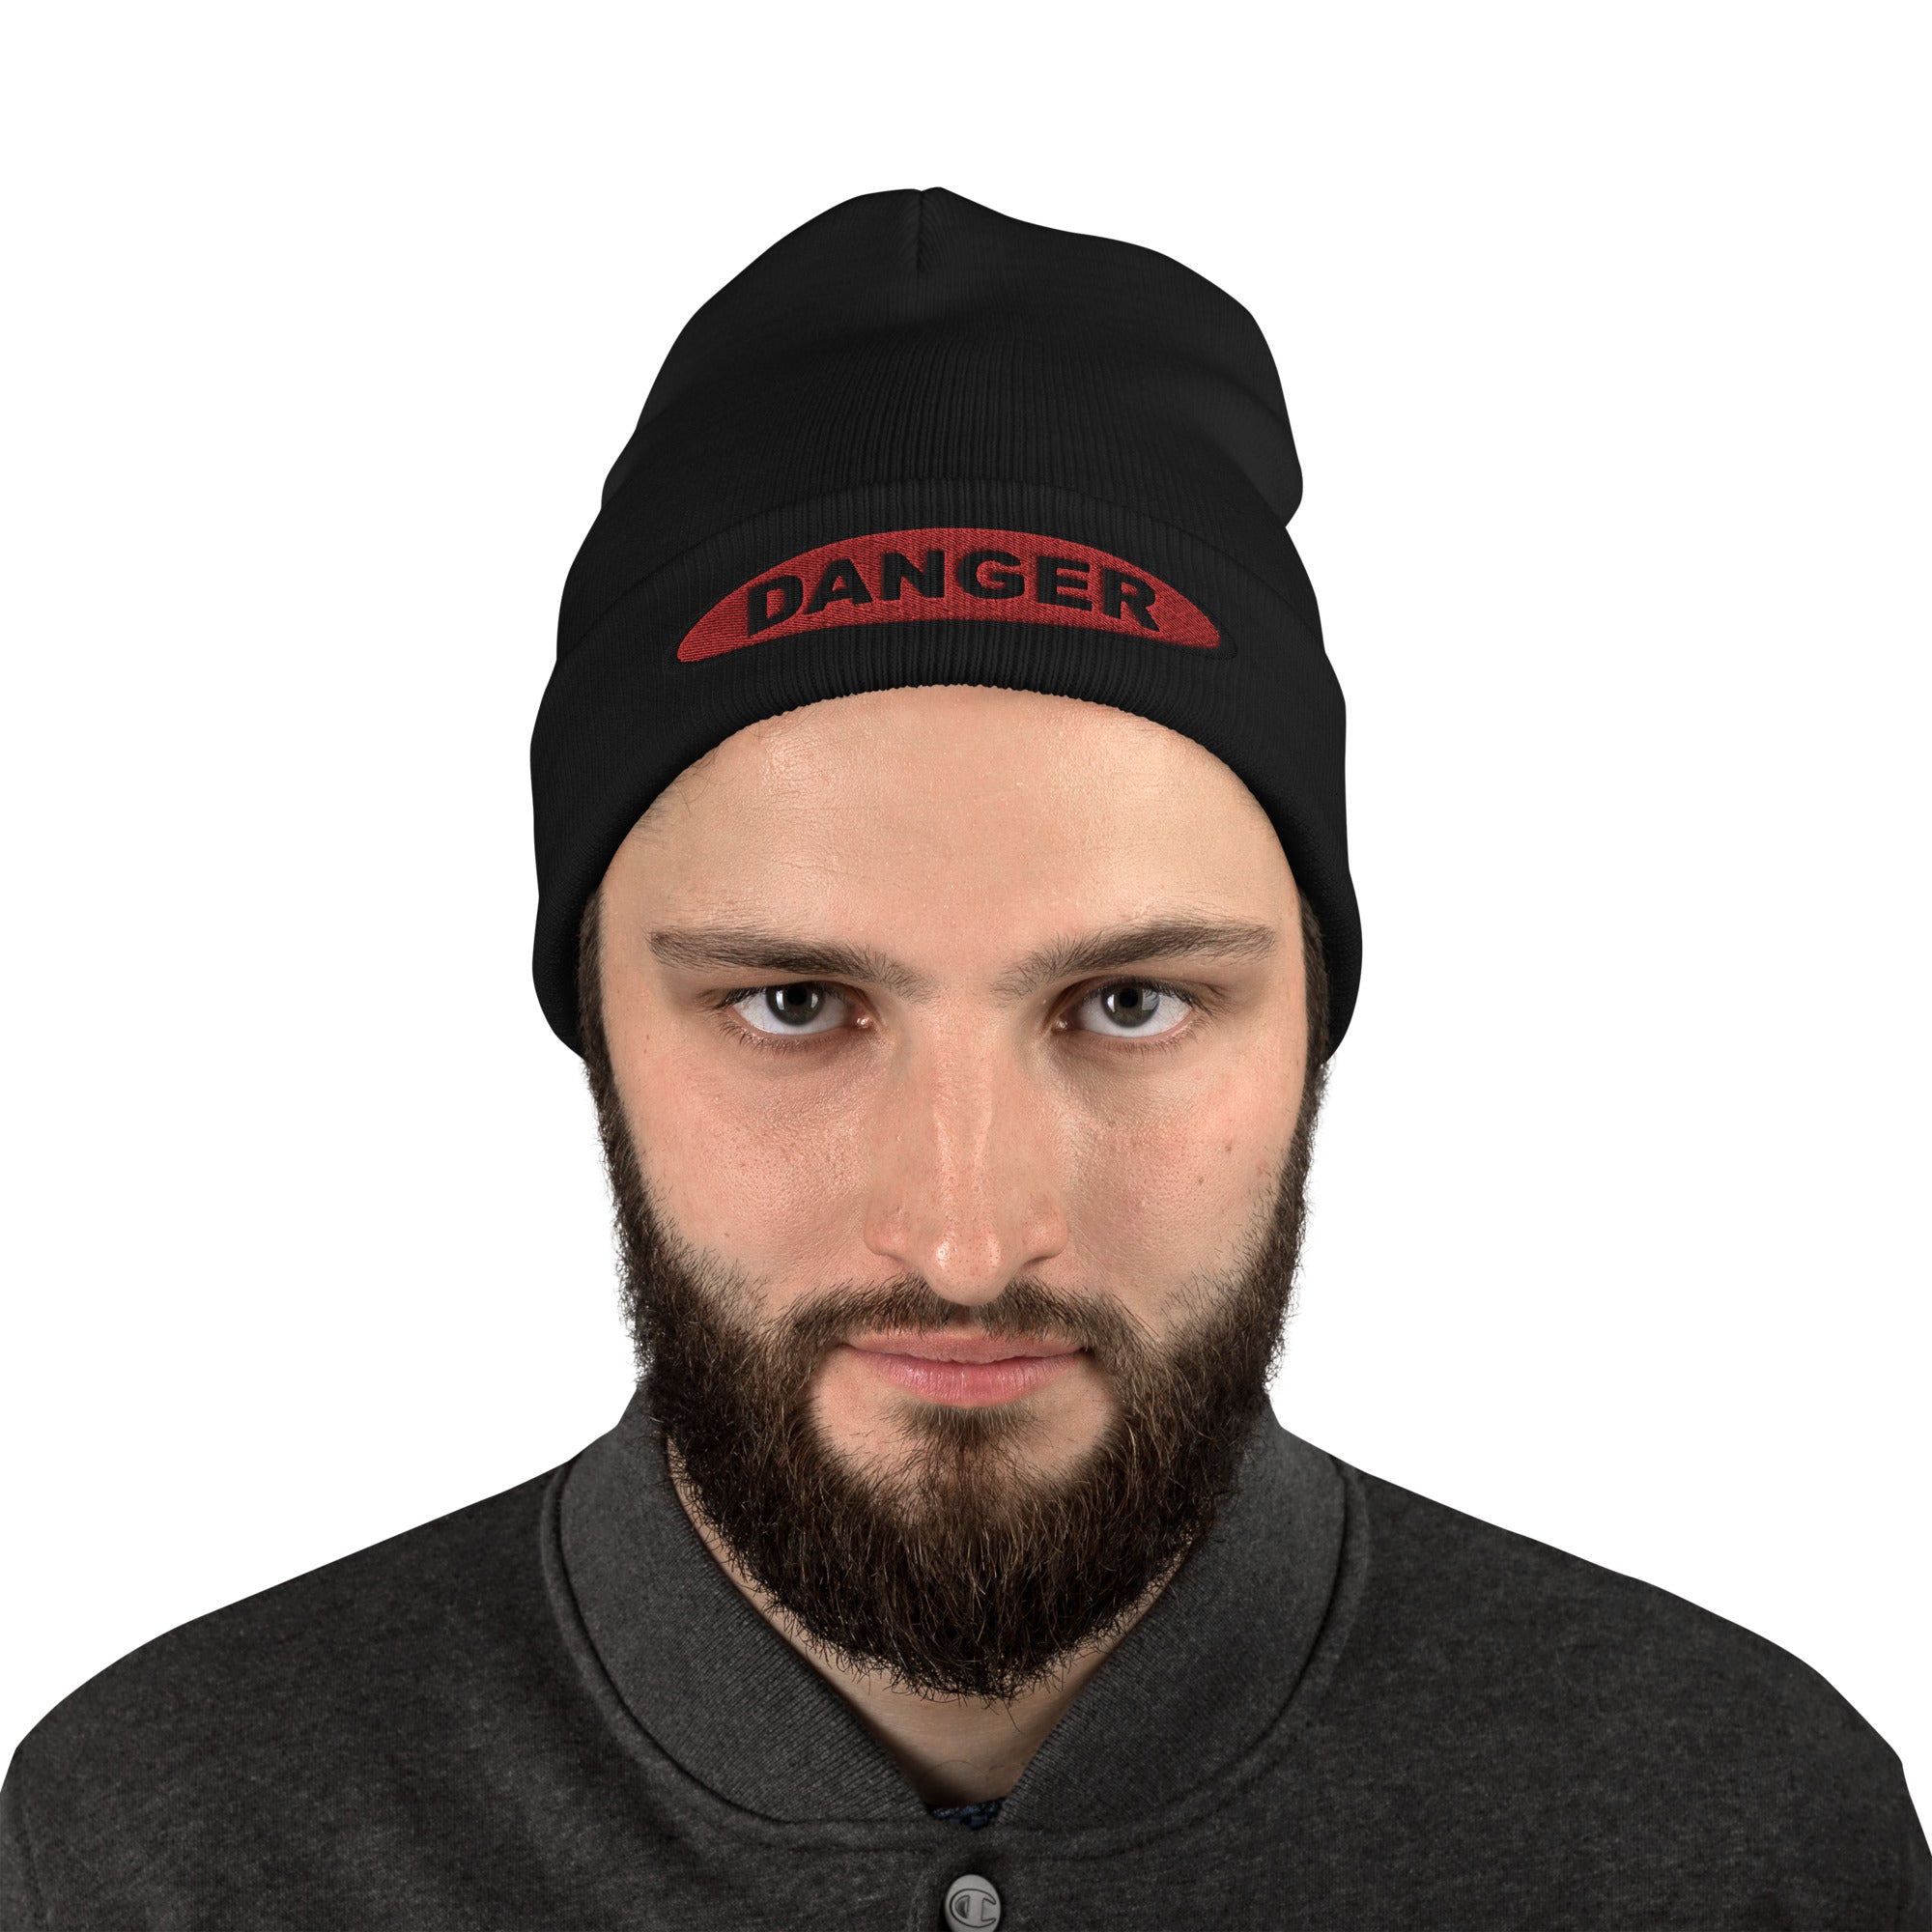 Danger Sign in Red Embroidered Cuff Beanie Warning - Edge of Life Designs